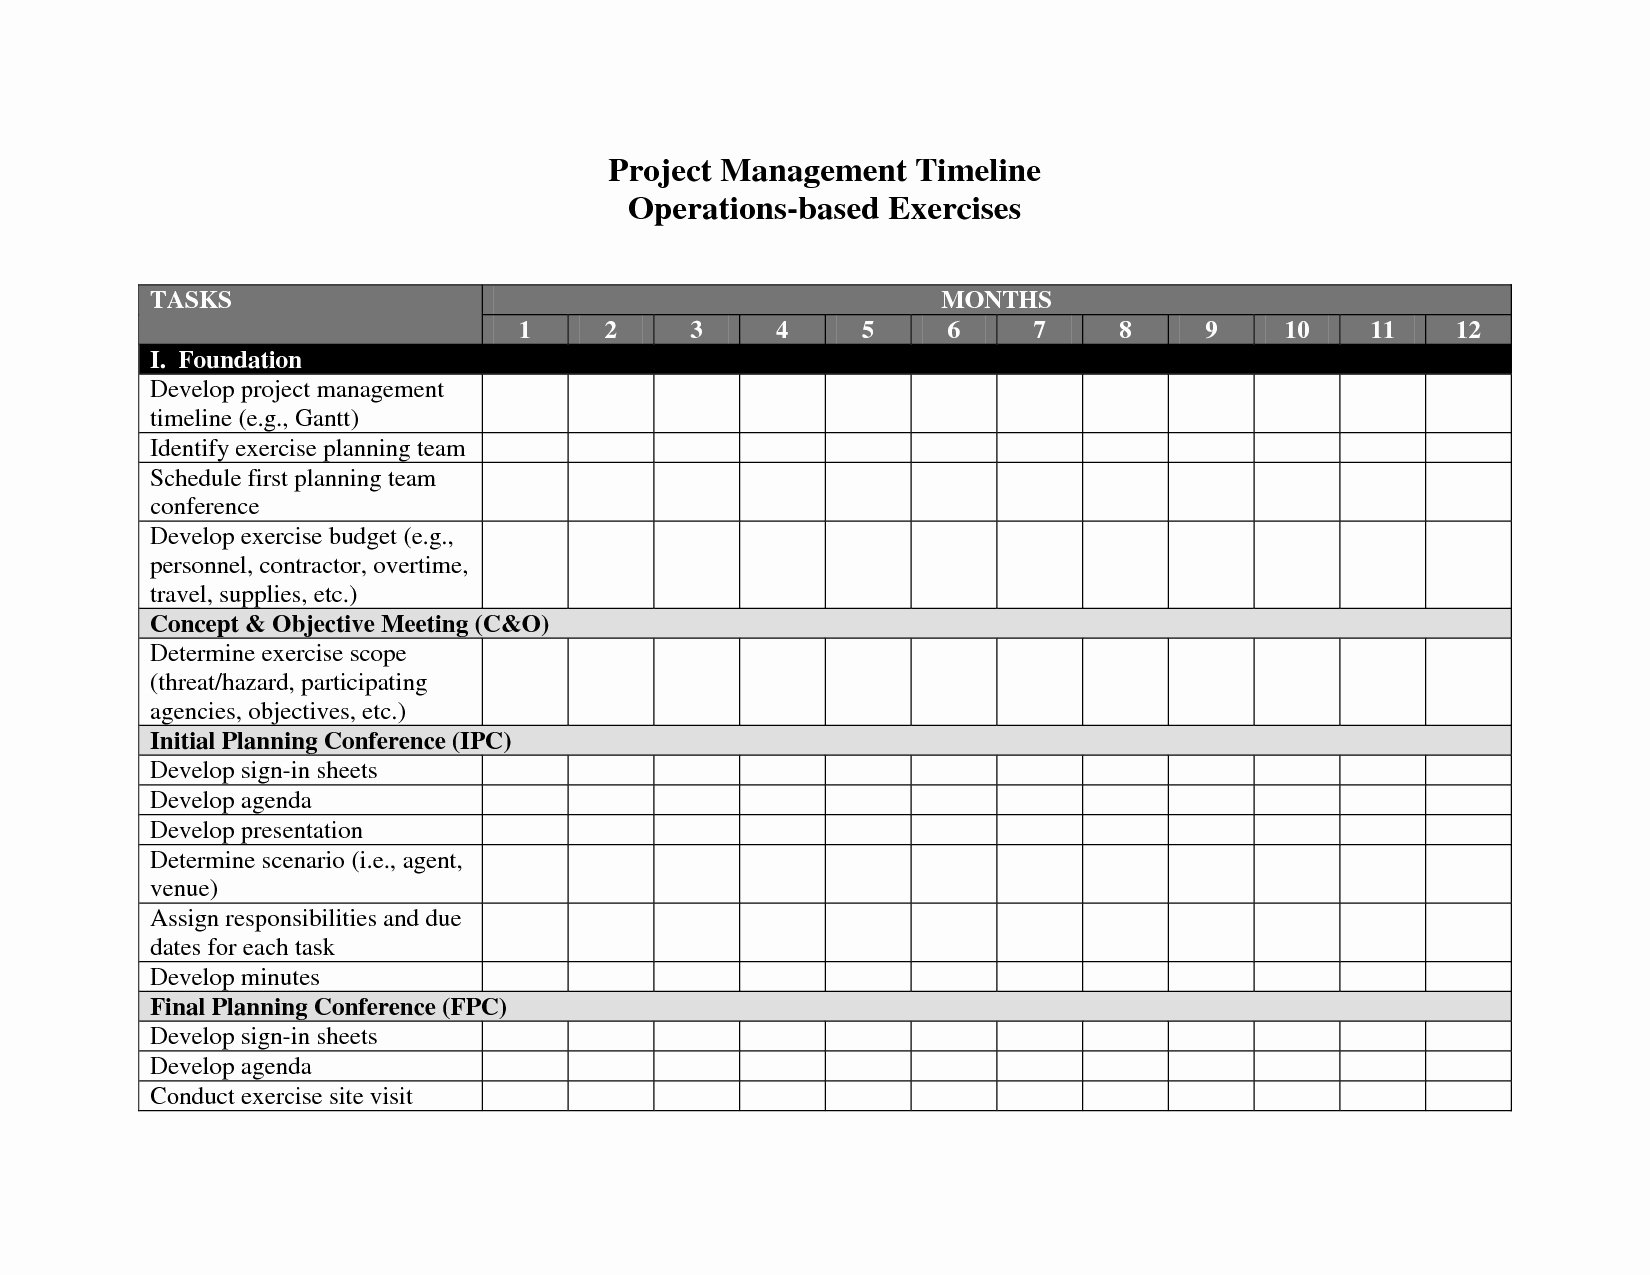 Project Timeline Template Word Luxury Project Management Timeline Template Word